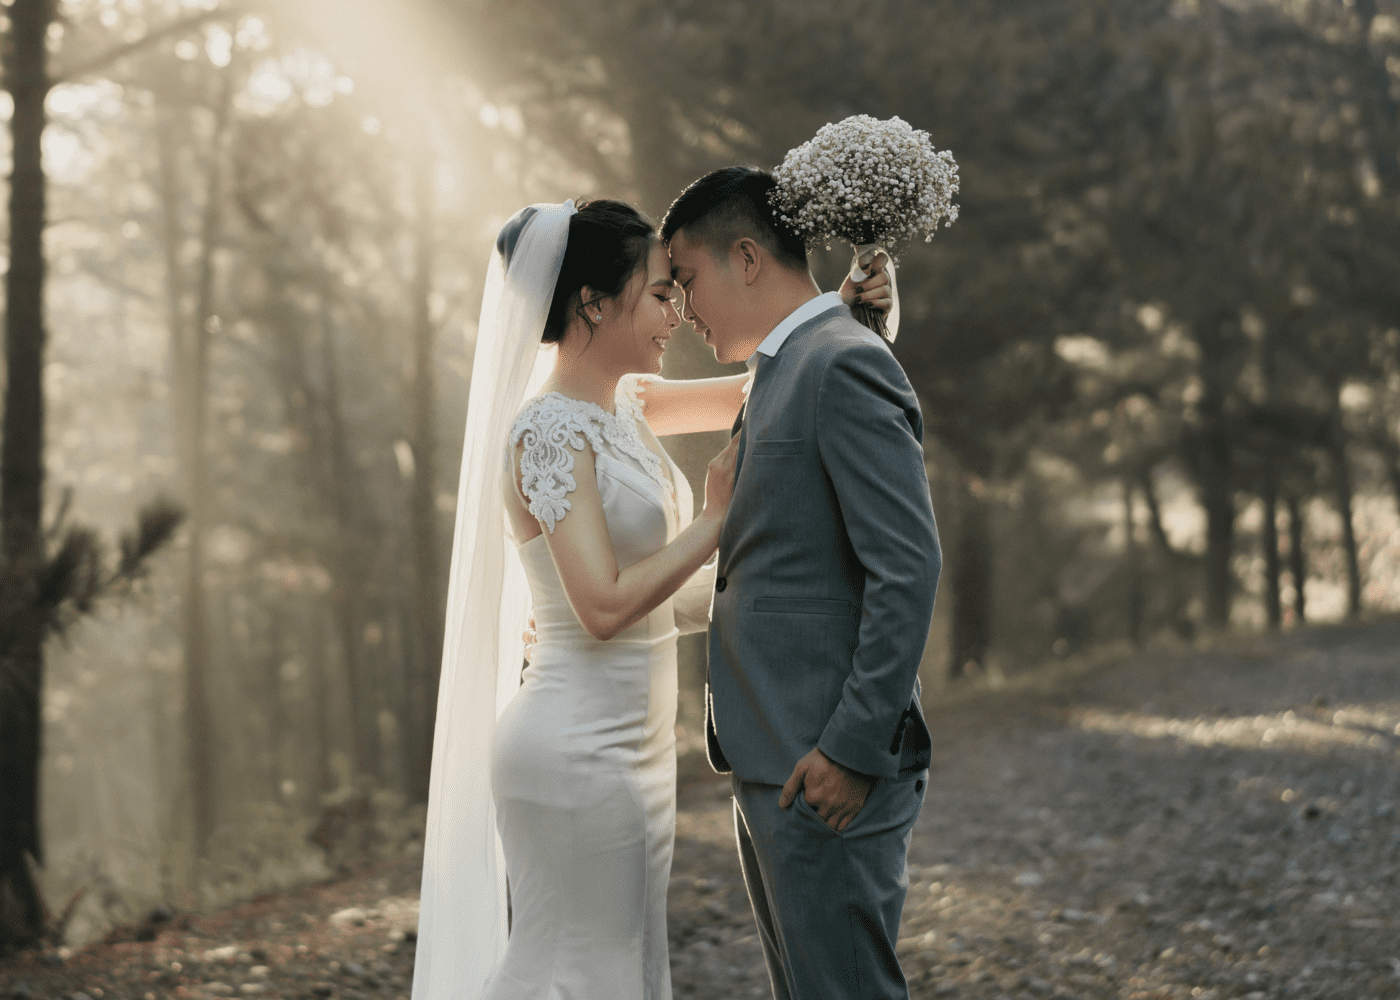 Capturing Everlasting Moments: The Artistry of a Wedding Photographer